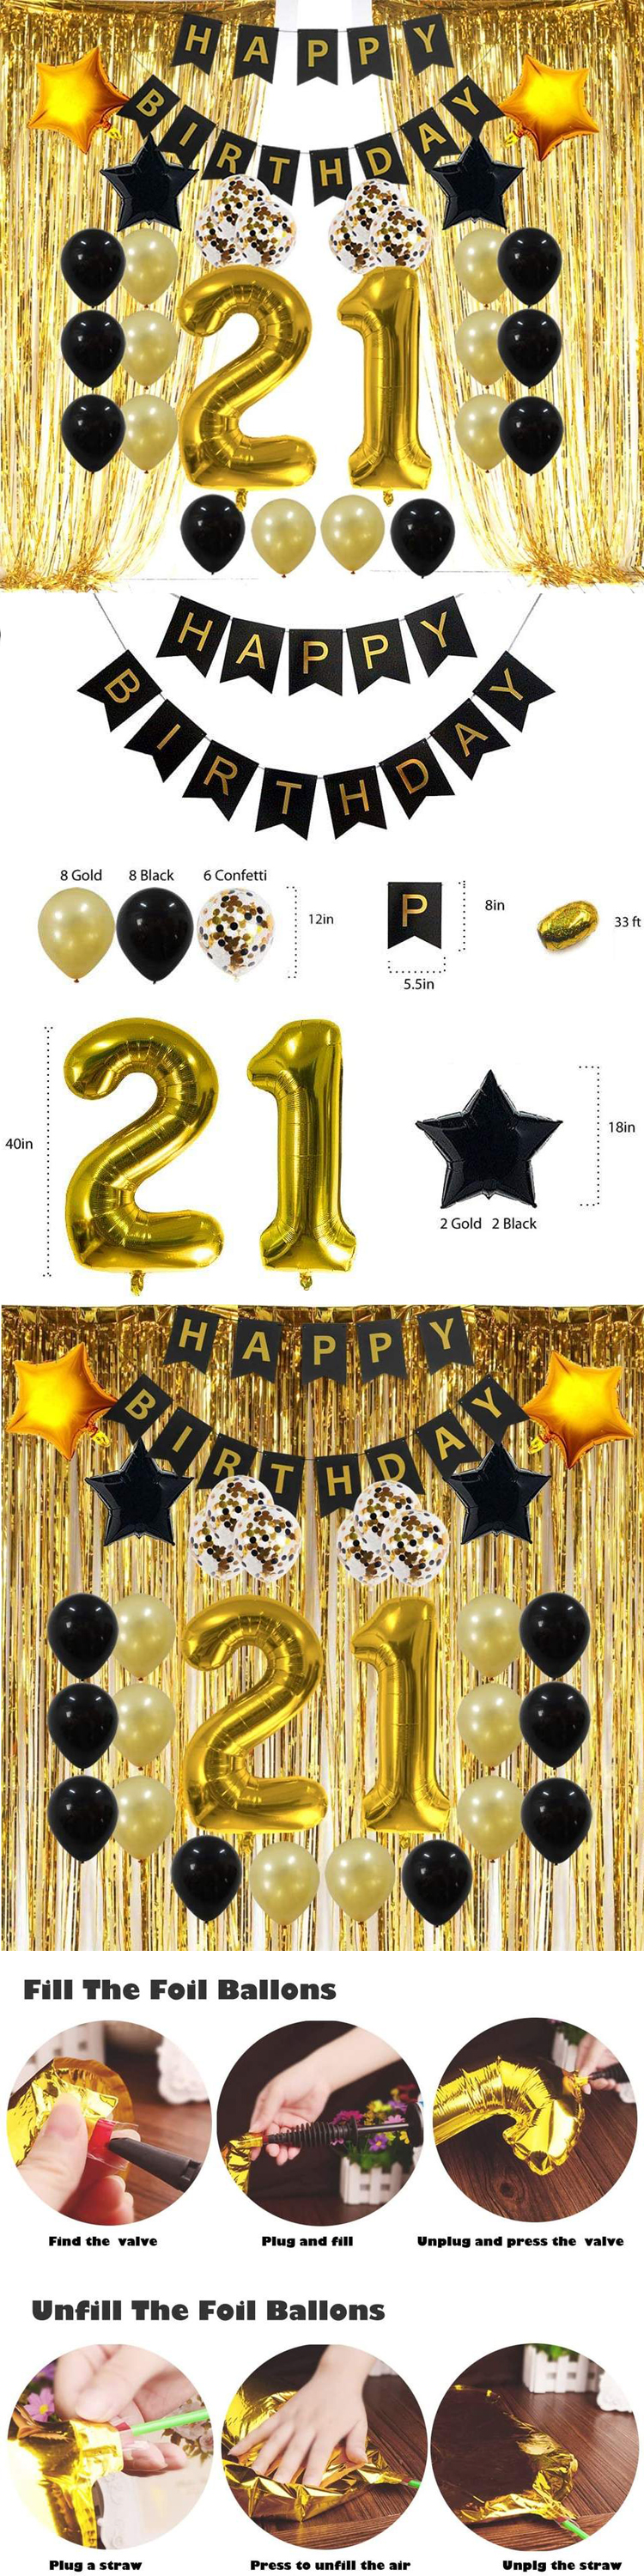 PAFU Gold And Black 21th Birthday Party Supplies Happy Birthday Banner Confetti Balloons Foil Curtain Birthday Decoratio